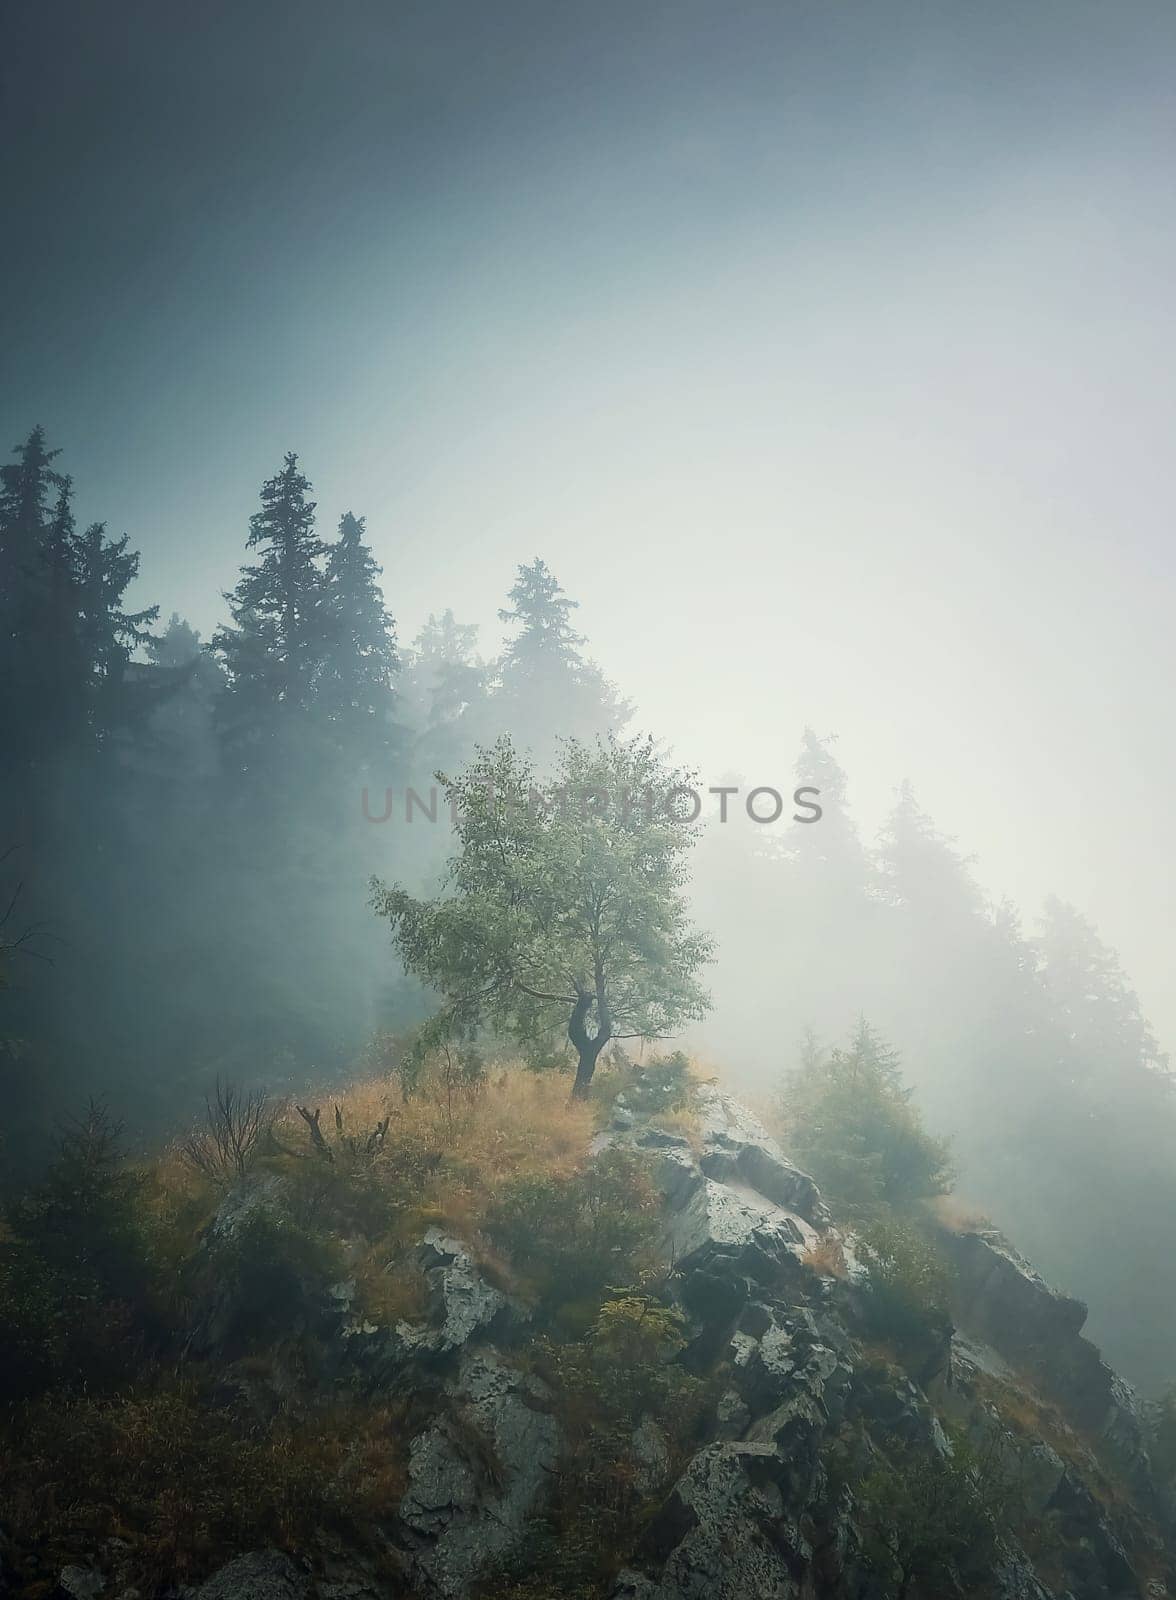 Solitary tree on the top of a hill surrounded by dense mist and a fir forest on the background. Beautiful and moody autumnal scene in Carpathian mountains by psychoshadow